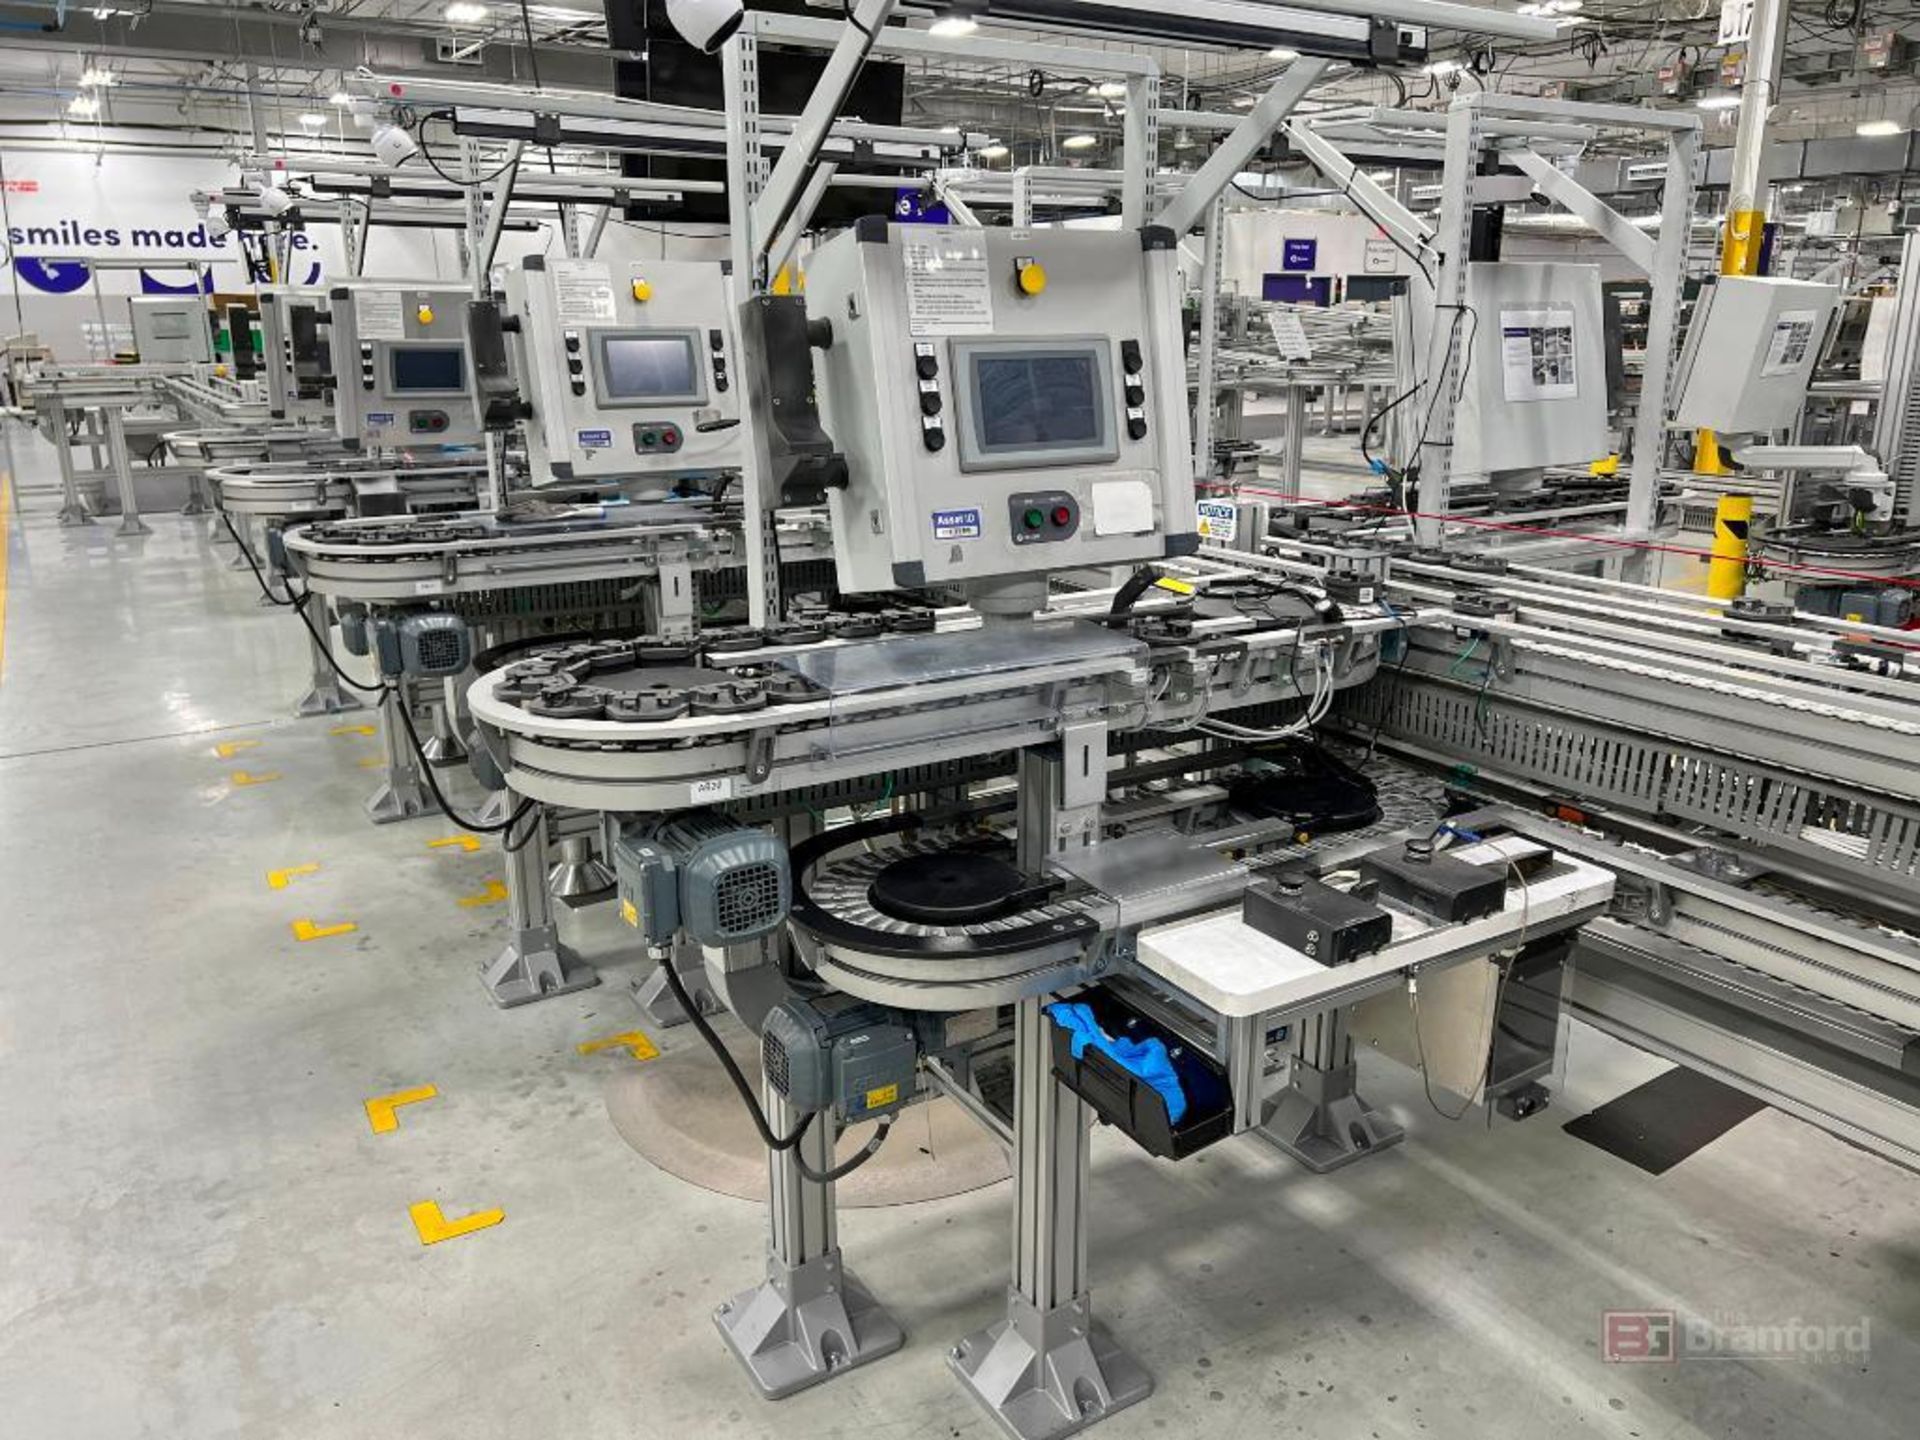 Flexlink Gen2 Multi-Layer Belt Conveyor System with DRO main control - Image 15 of 18